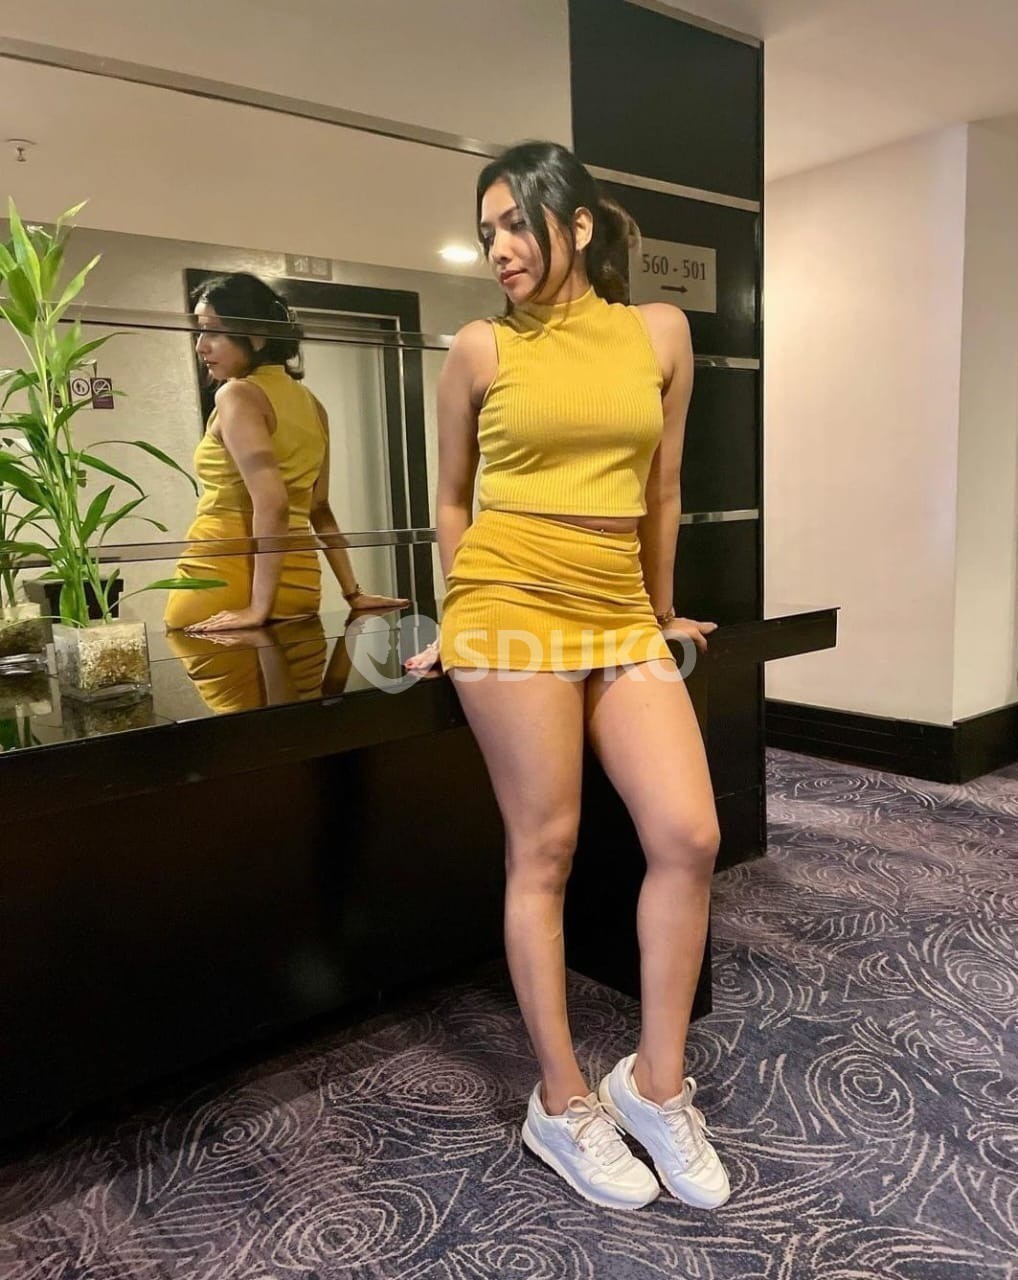 ➡️ NOTE::READ FIRST ★PAYMENT IN ROOM GIRL HAND★ ✅SHORT 5OOO NIGHT 1OOOO ✅ ⏩ DELHI CALL GIRLS BOOKING REAL 